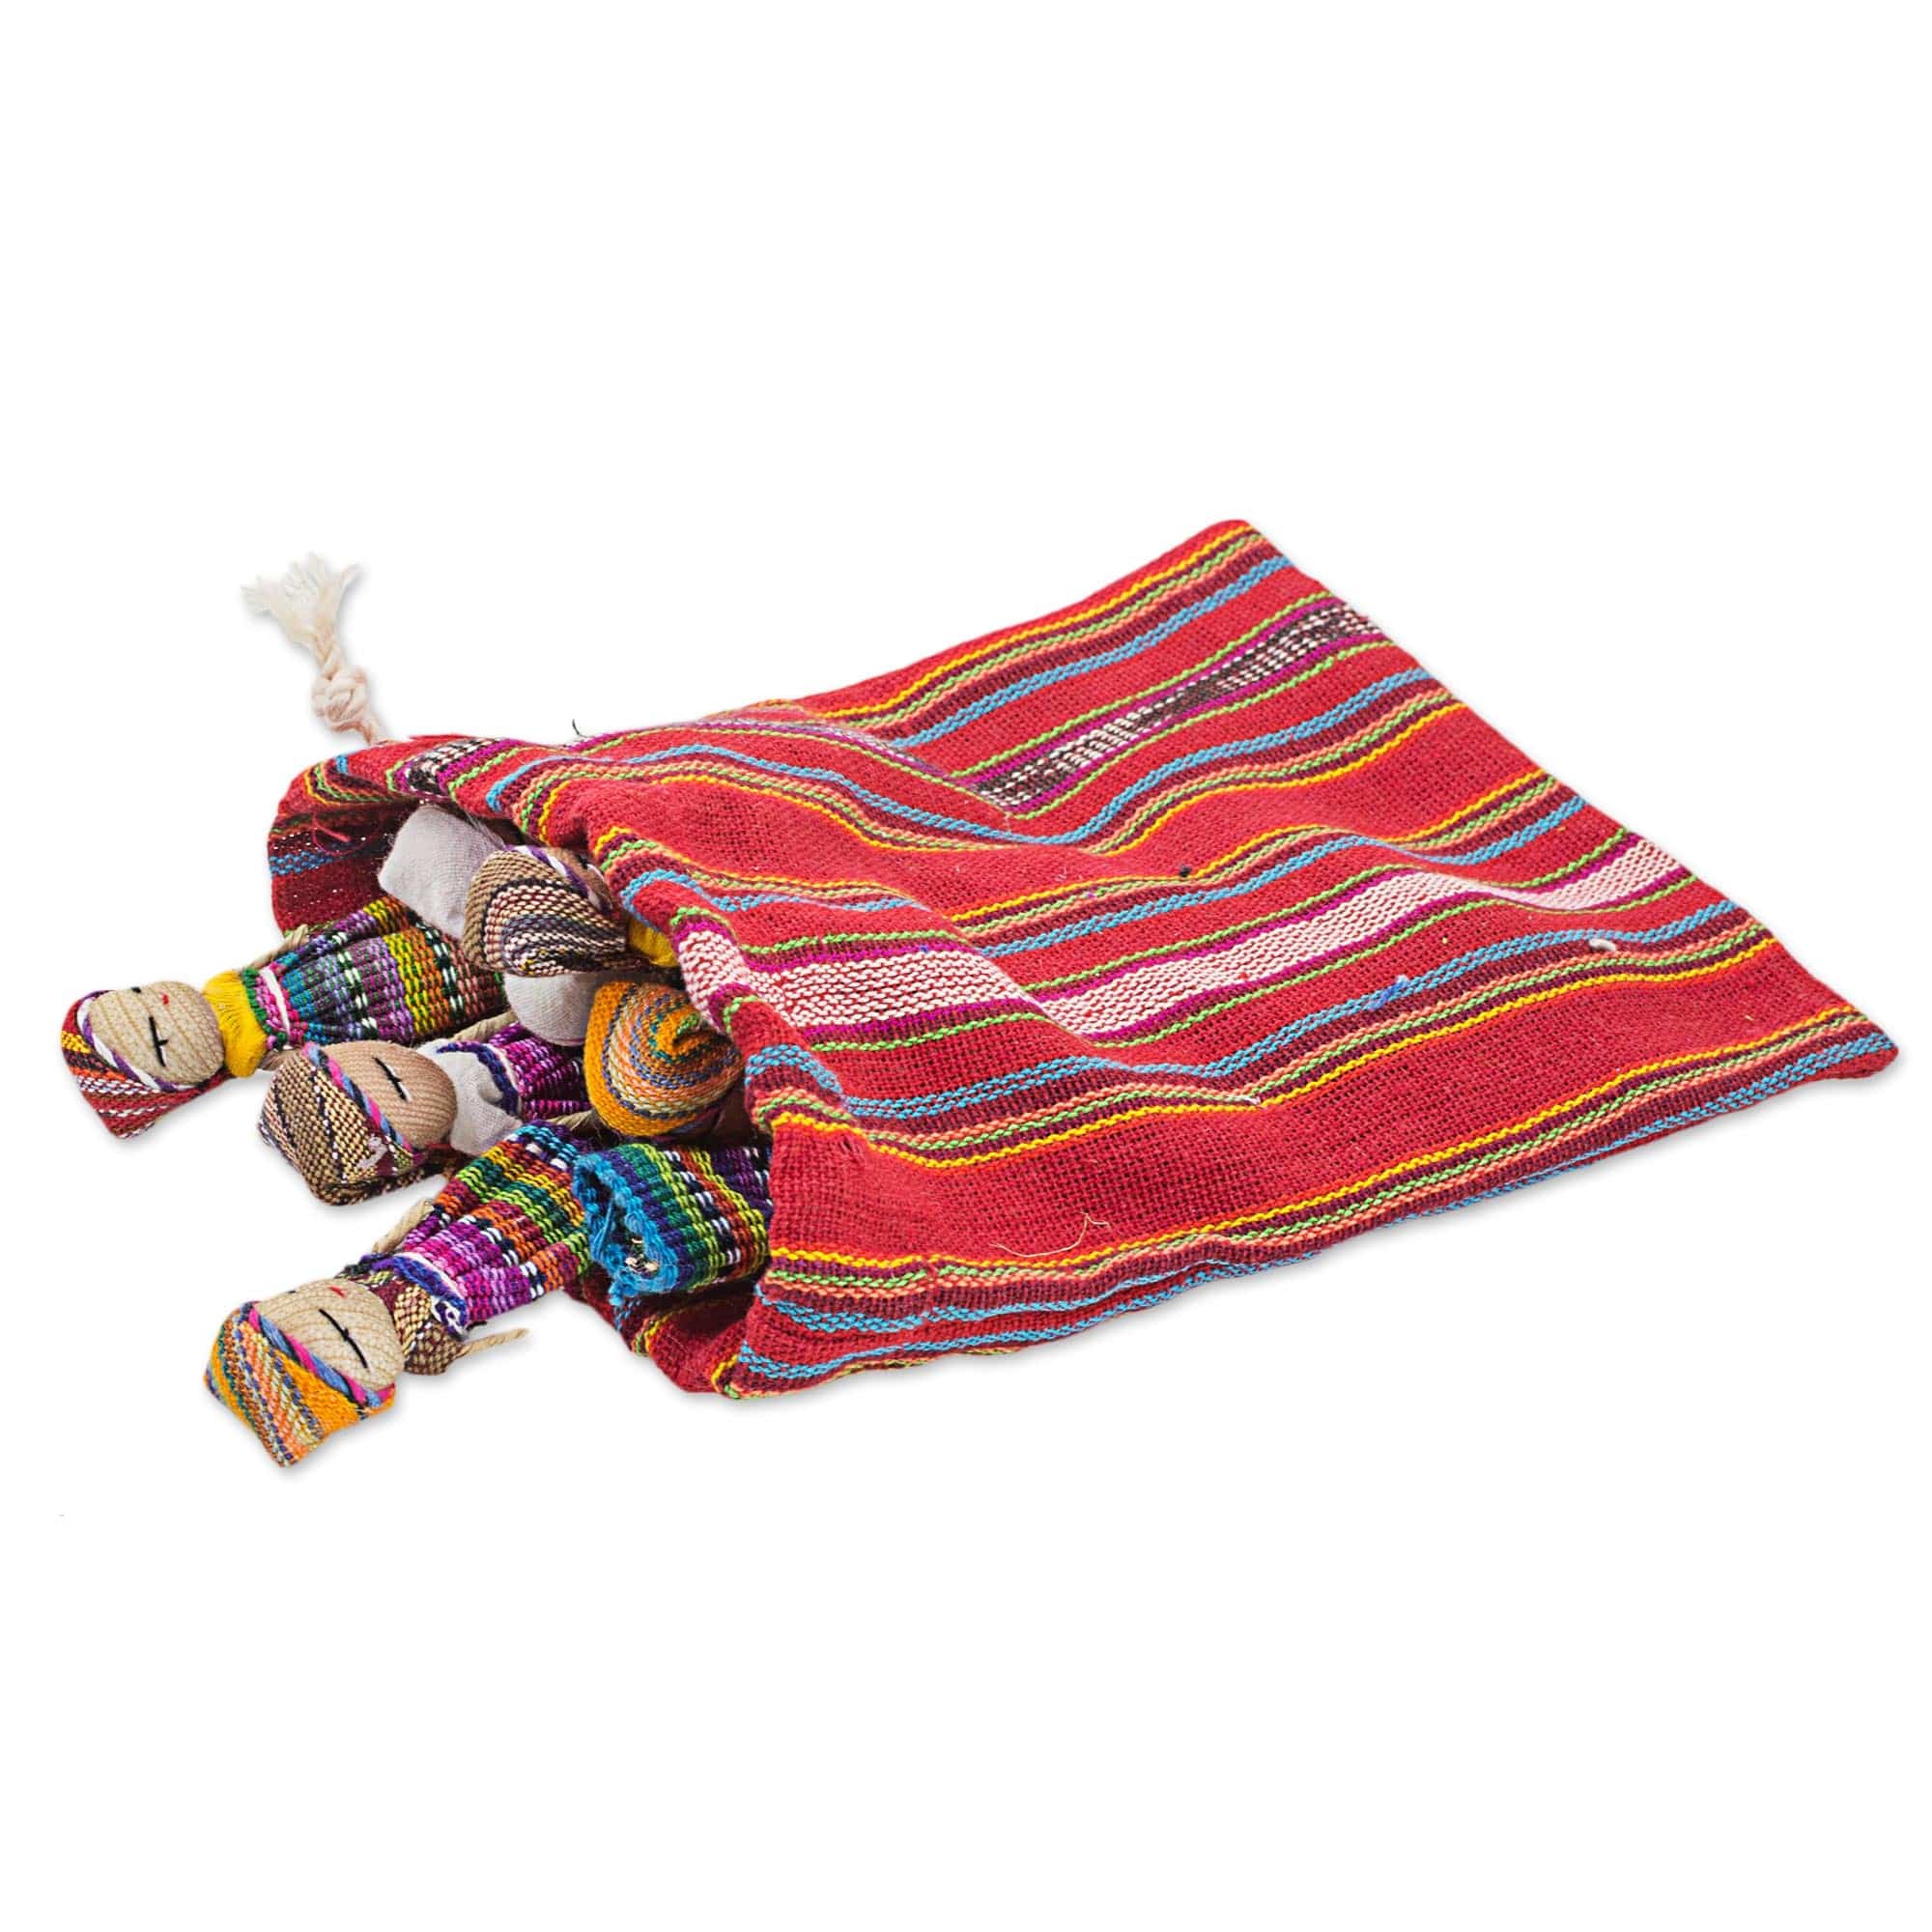 Pouch Containing 5 Worry Dolls, Each Doll About 2 Tall